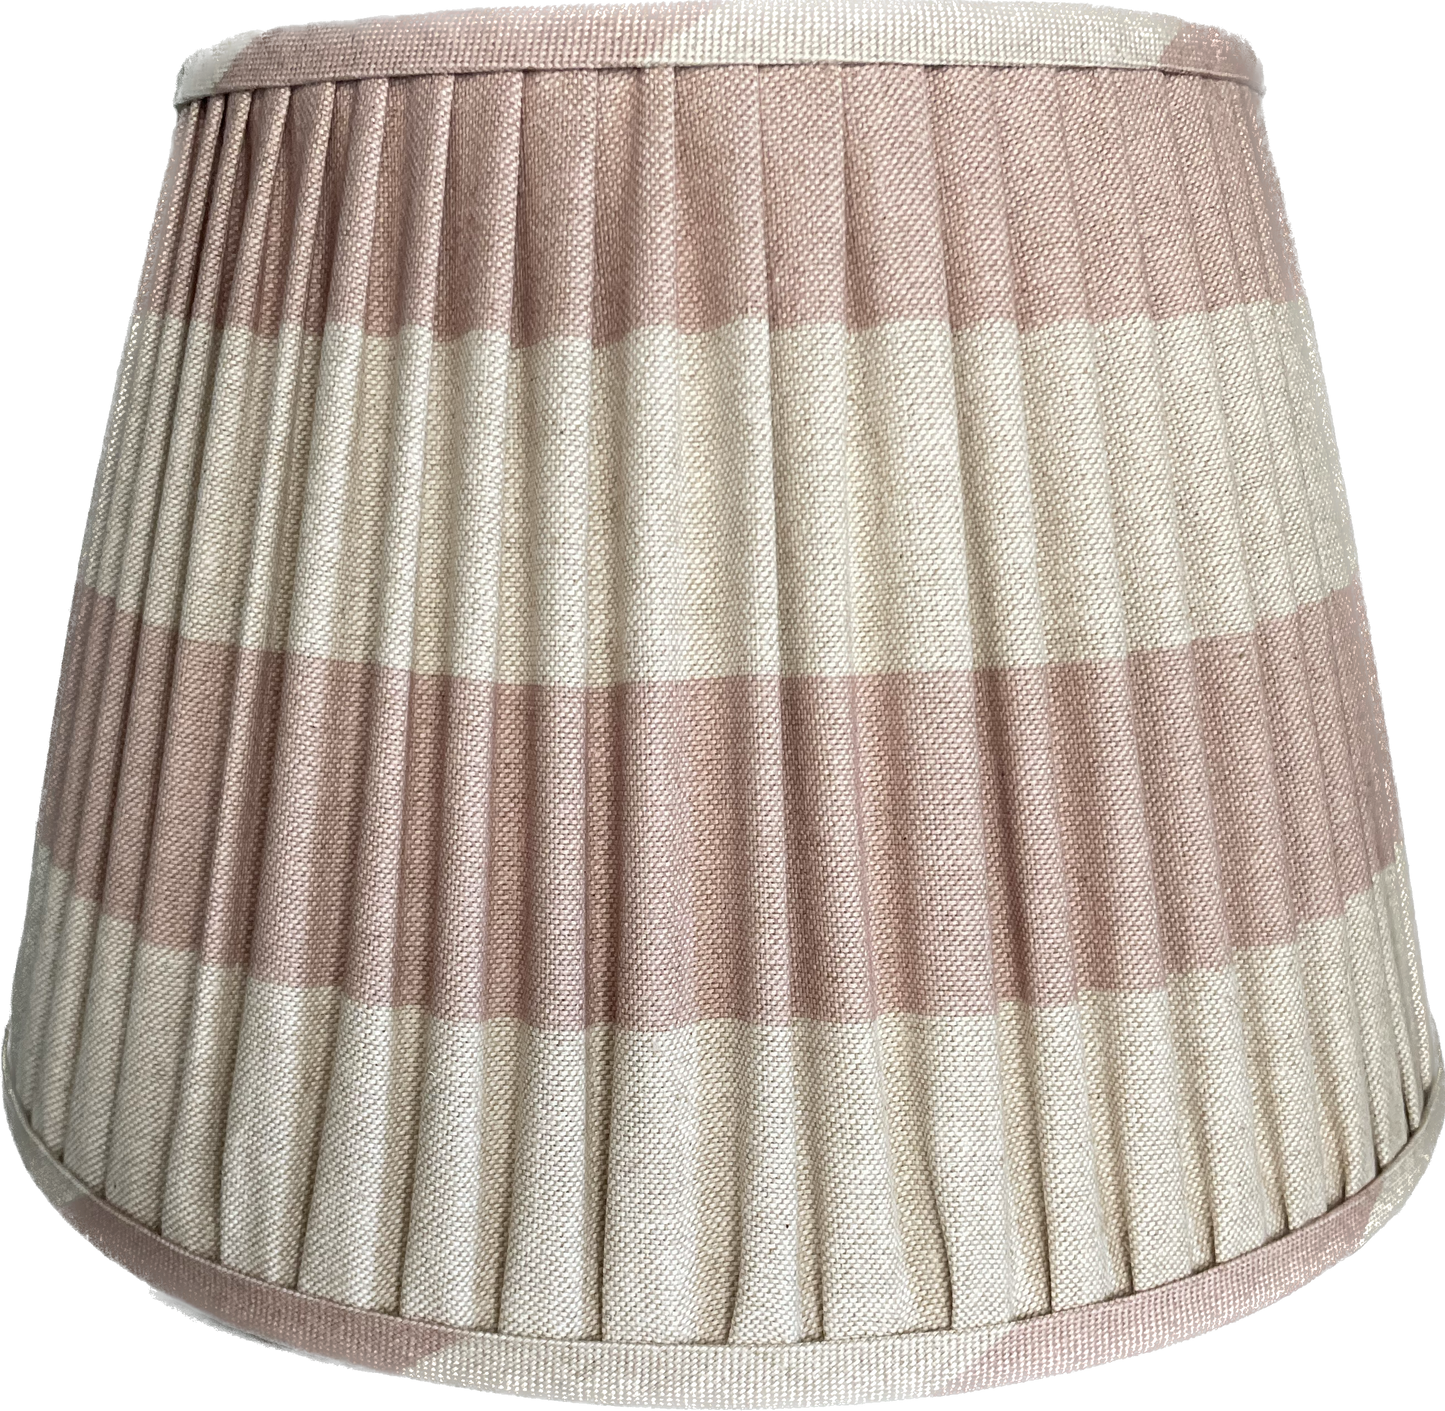 Pink and White Stripe Gathered Lampshade